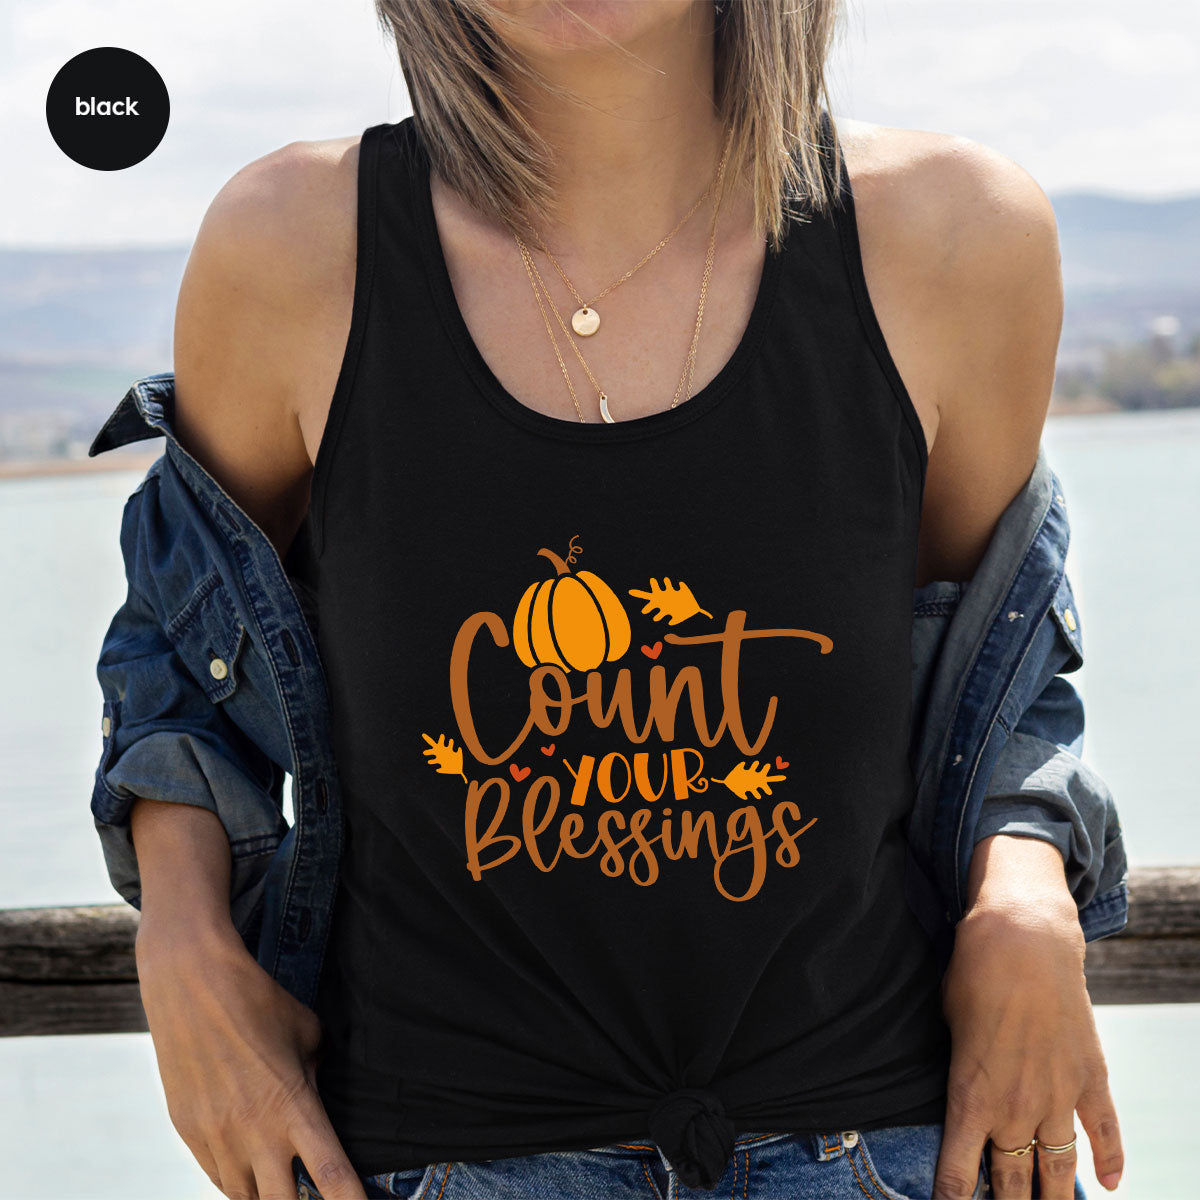 Cute Fall Outfit, Pumpkin Shirts, Gift for Her, Thanksgiving Clothing, Autumn Crewneck Sweatshirt, Blessed Vneck Tshirt, Leaves Graphic Tees